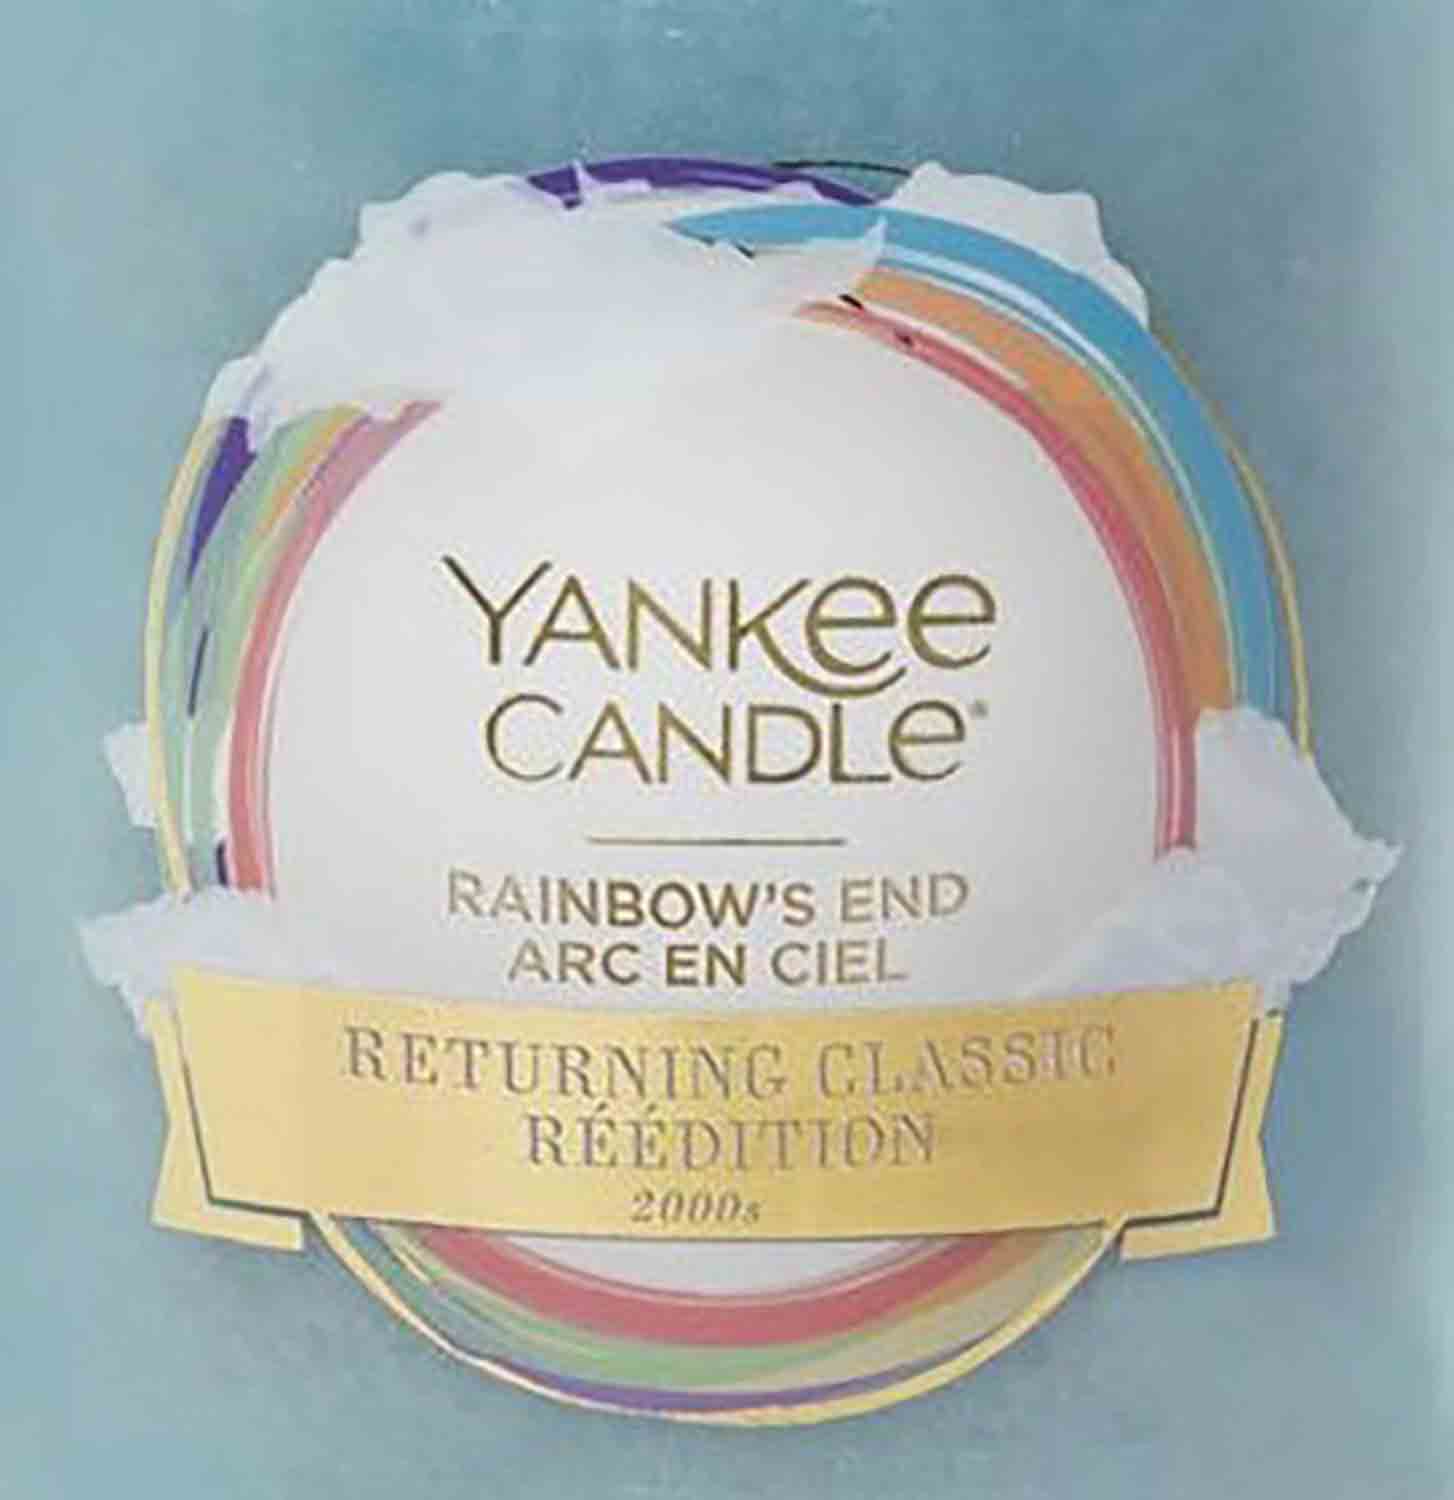 Yankee Candle Rainbow's End USA 22 g - Crumble vosk